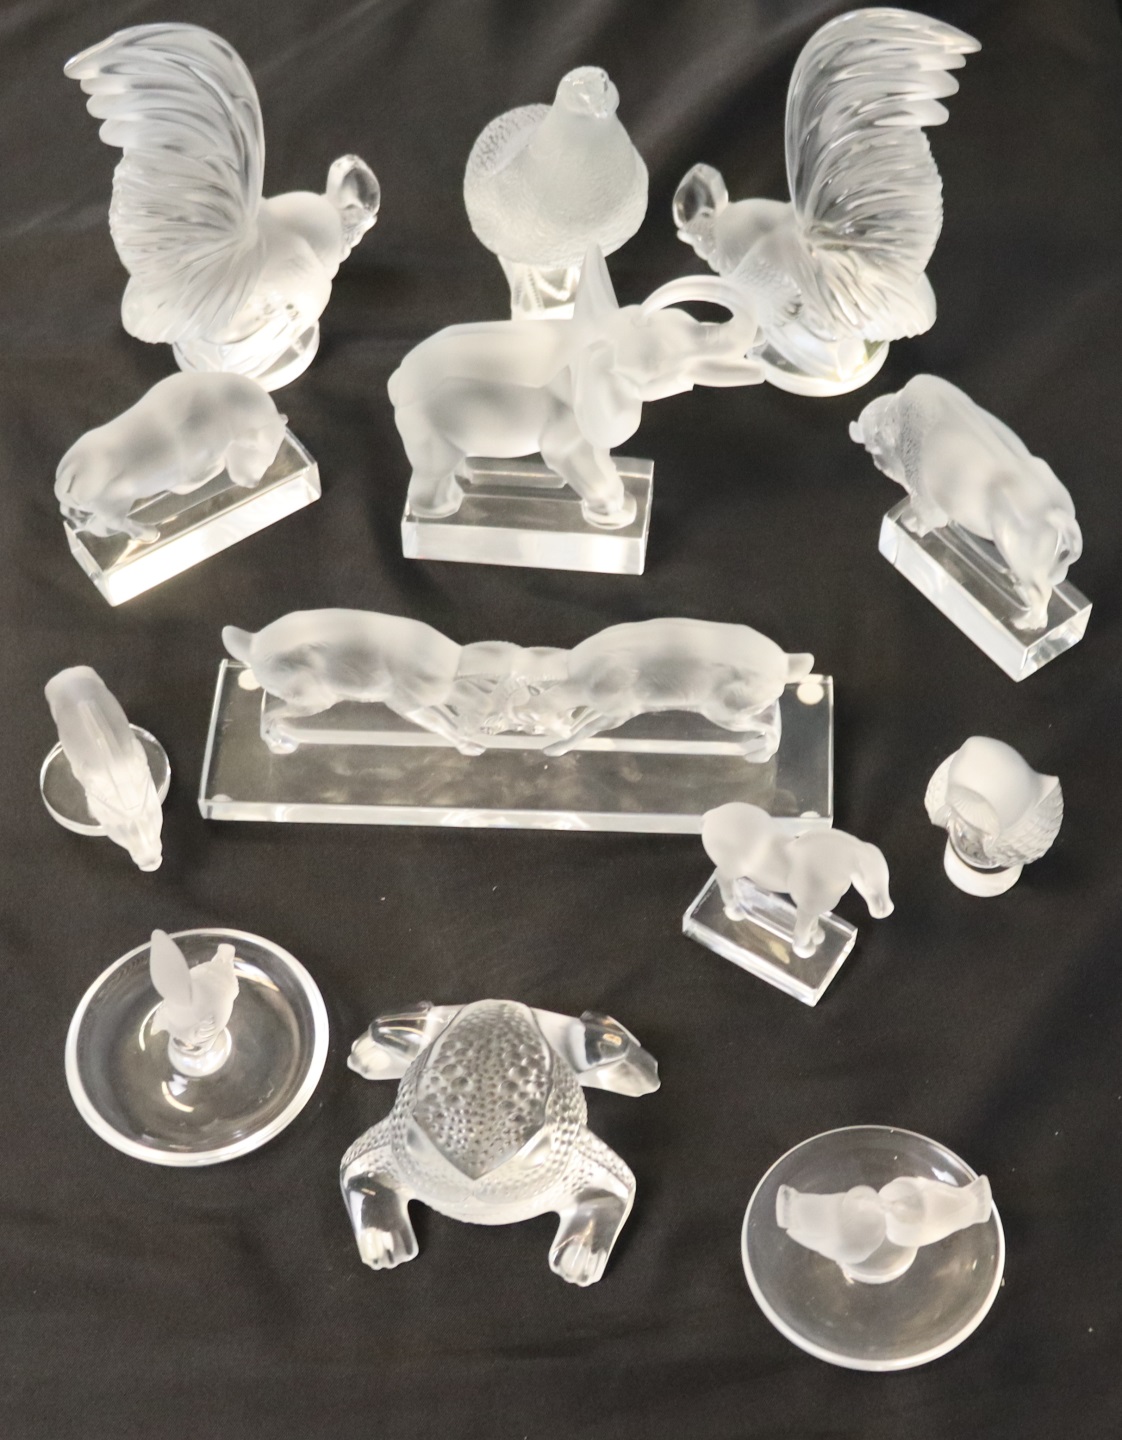 GROUPING OF LALIQUE ANIMALS. Includes